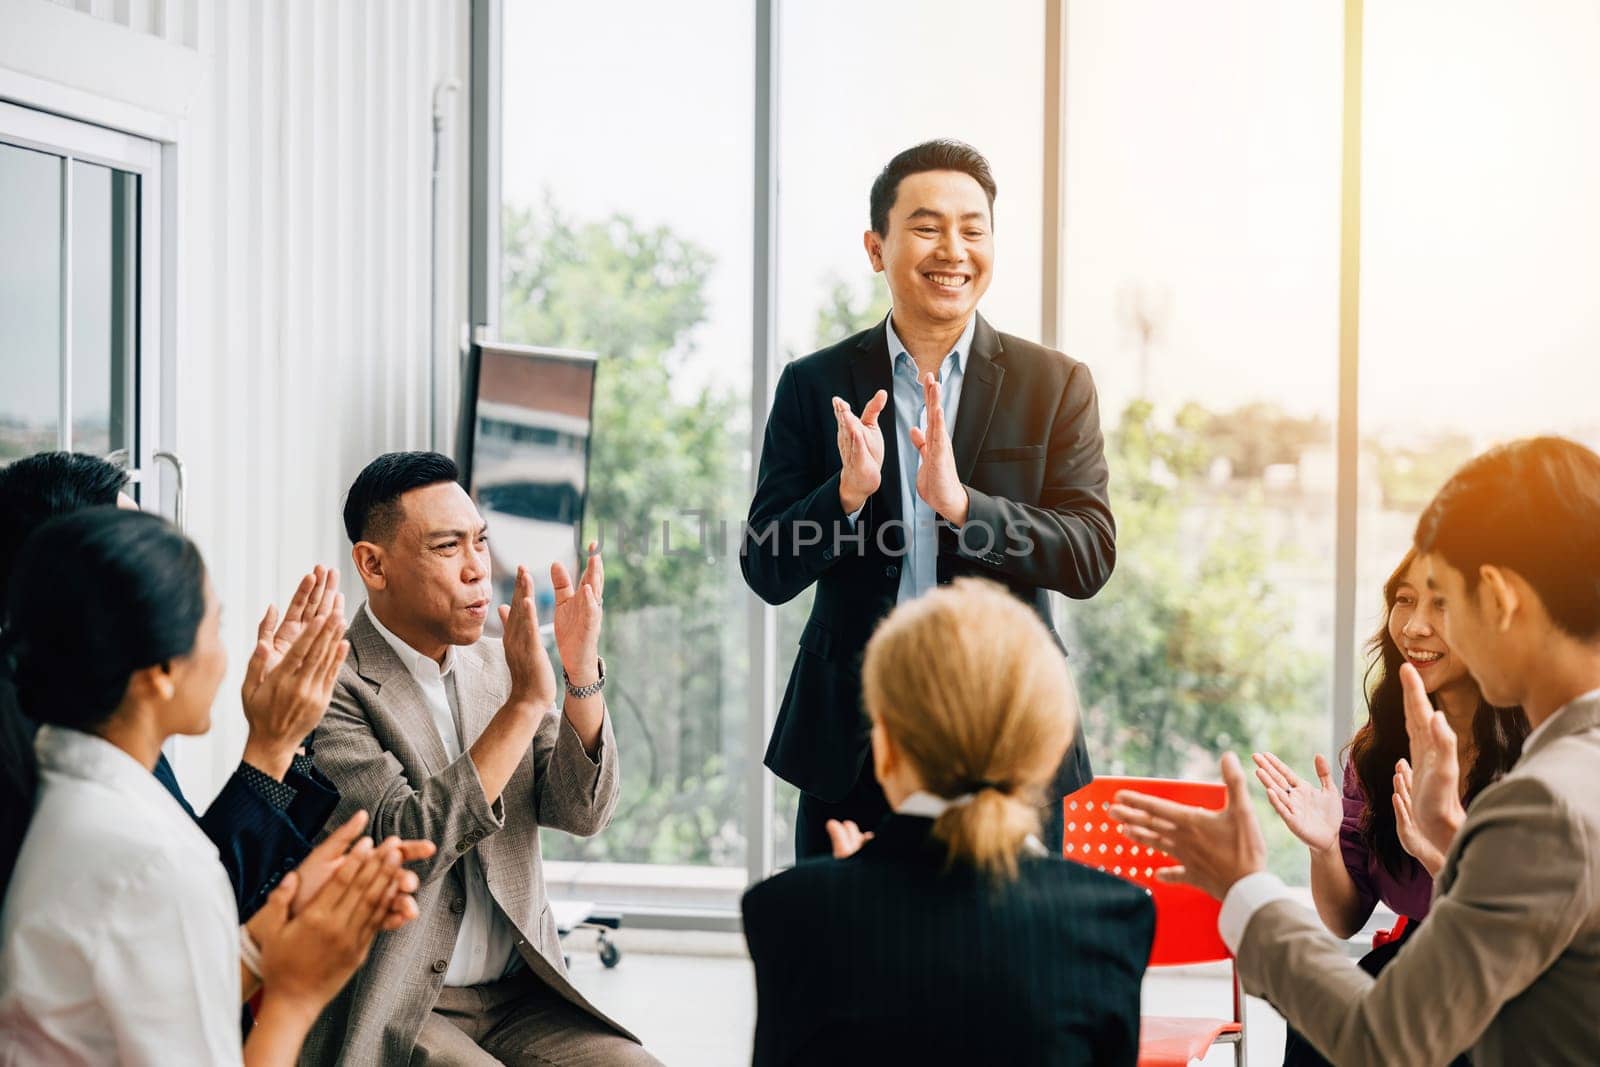 During a seminar, a teacher explains strategies, and the diverse audience raises hands to ask questions. This fosters cooperation, learning, and effective leadership.